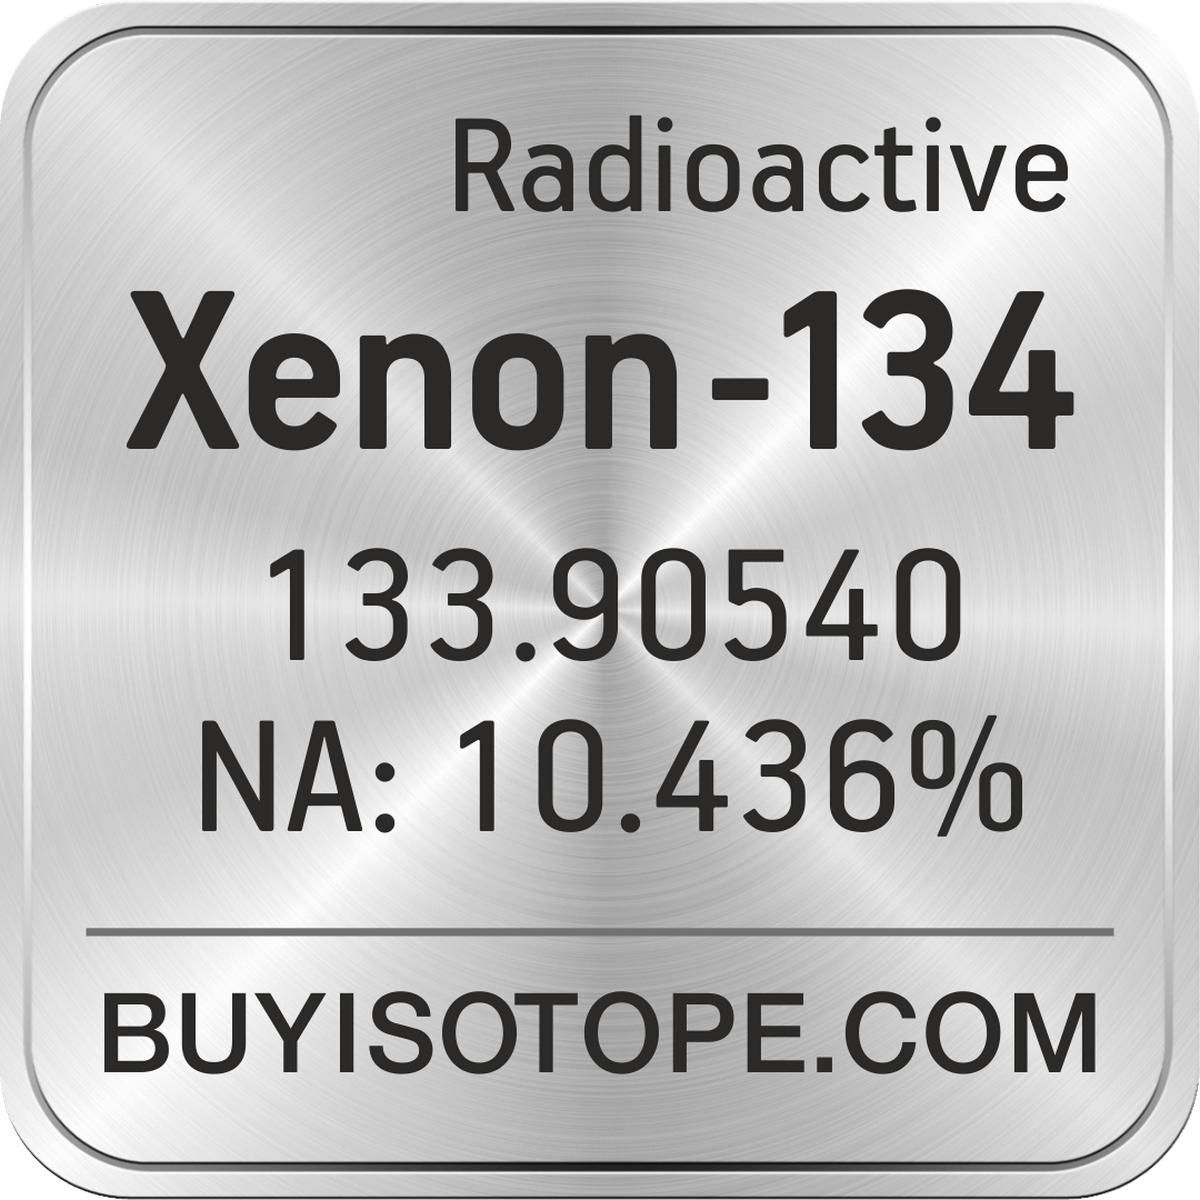 https://www.buyisotope.com/isotope-images/xenon-134-isotope-xenon-134-enriched-xenon-134-abundance-xenon-134-buy-xenon-134-supplier-xenon-134-atomic-mass-xenon-134-1200.png